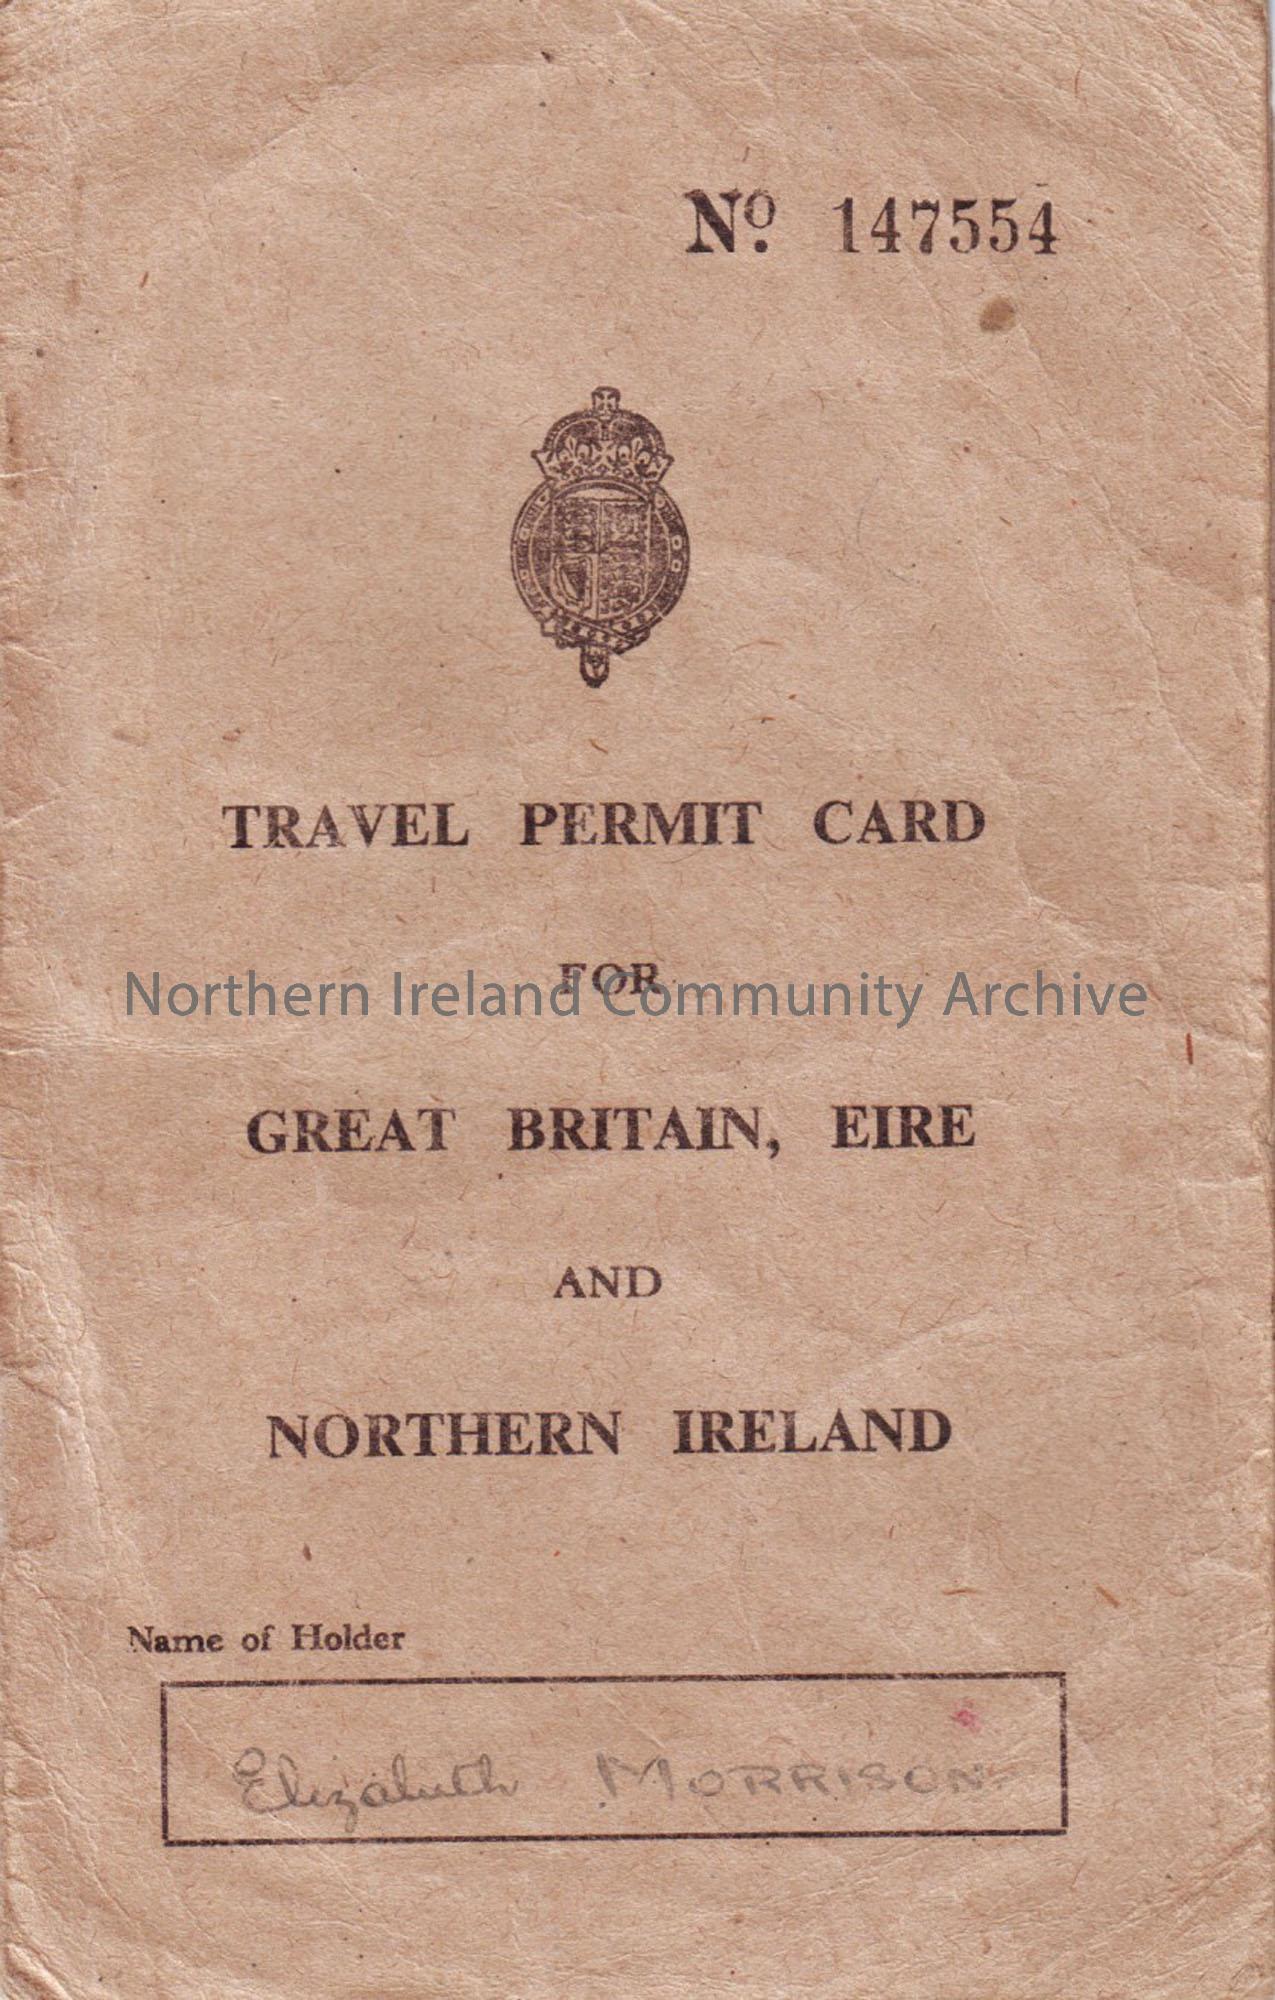 Travel Permit Card belonging to Elizabeth Morrison (later Craig), dated 26th June 1945. No. 147554. Includes personal details and photograph